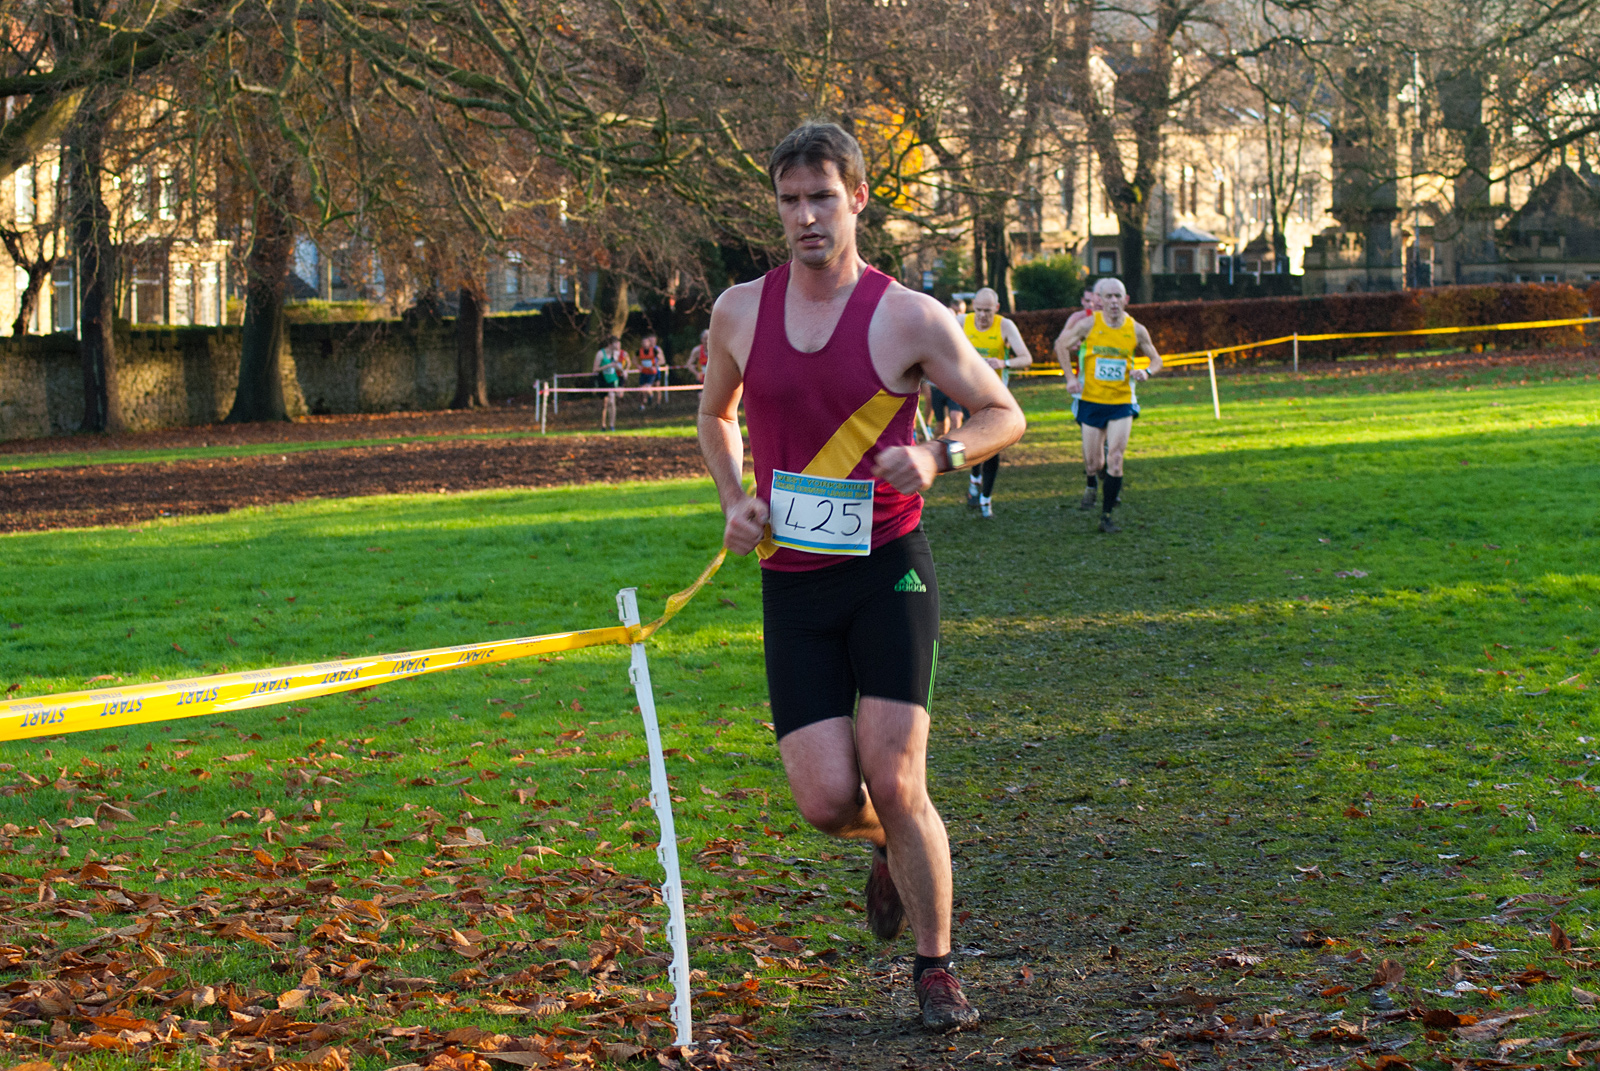 West Yorkshire Cross Country League Keighley Pudsey and Bramley